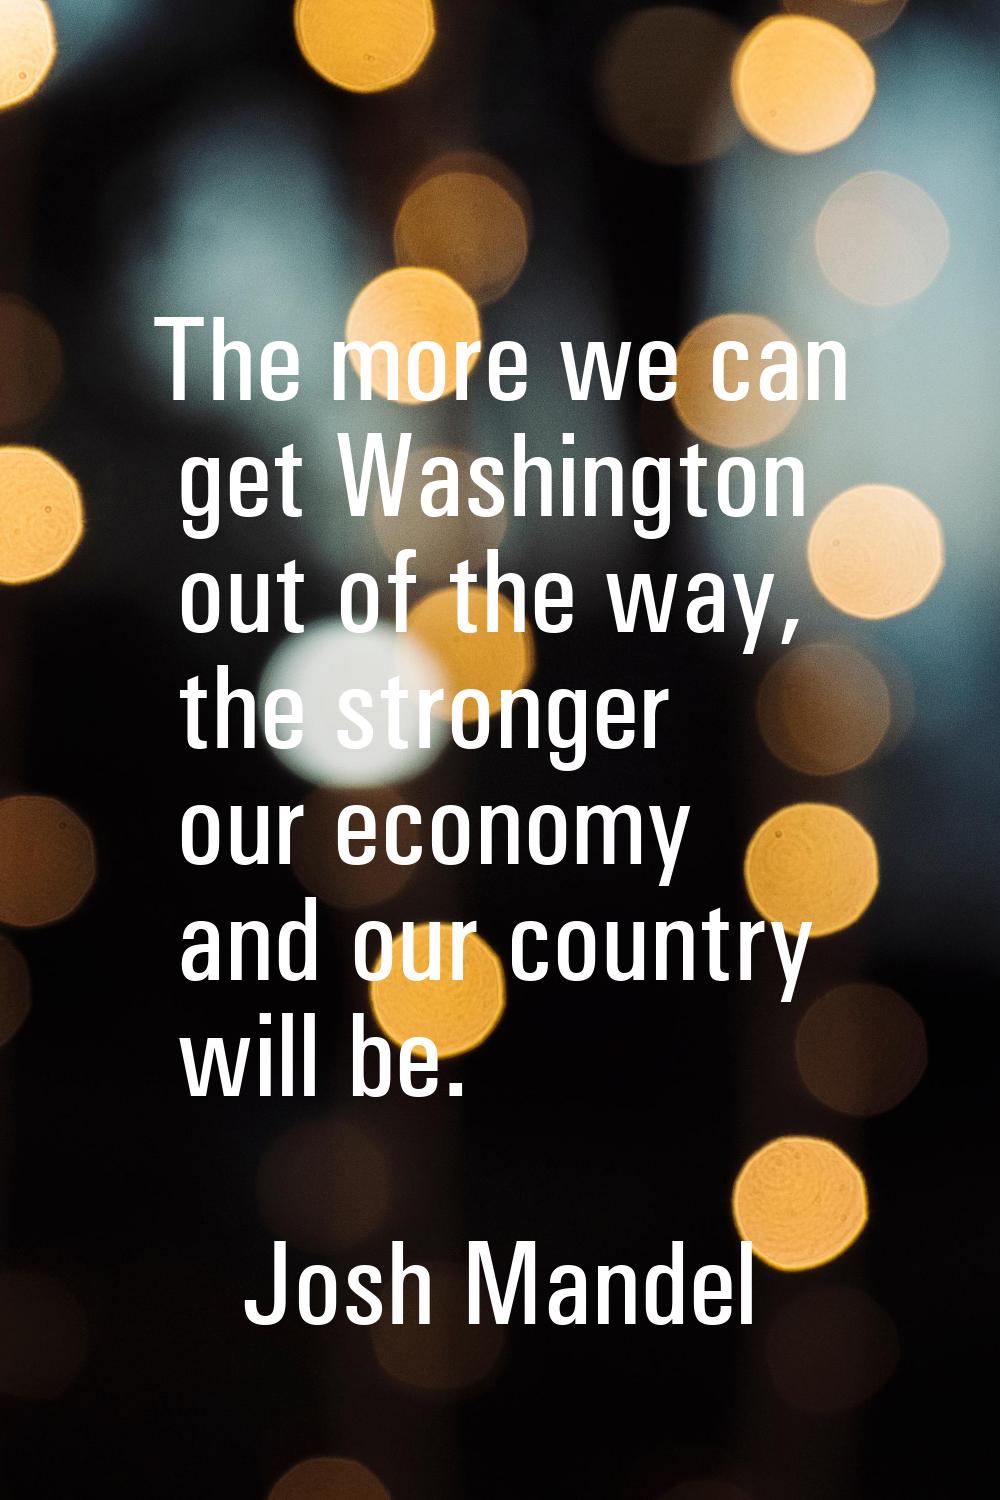 The more we can get Washington out of the way, the stronger our economy and our country will be.